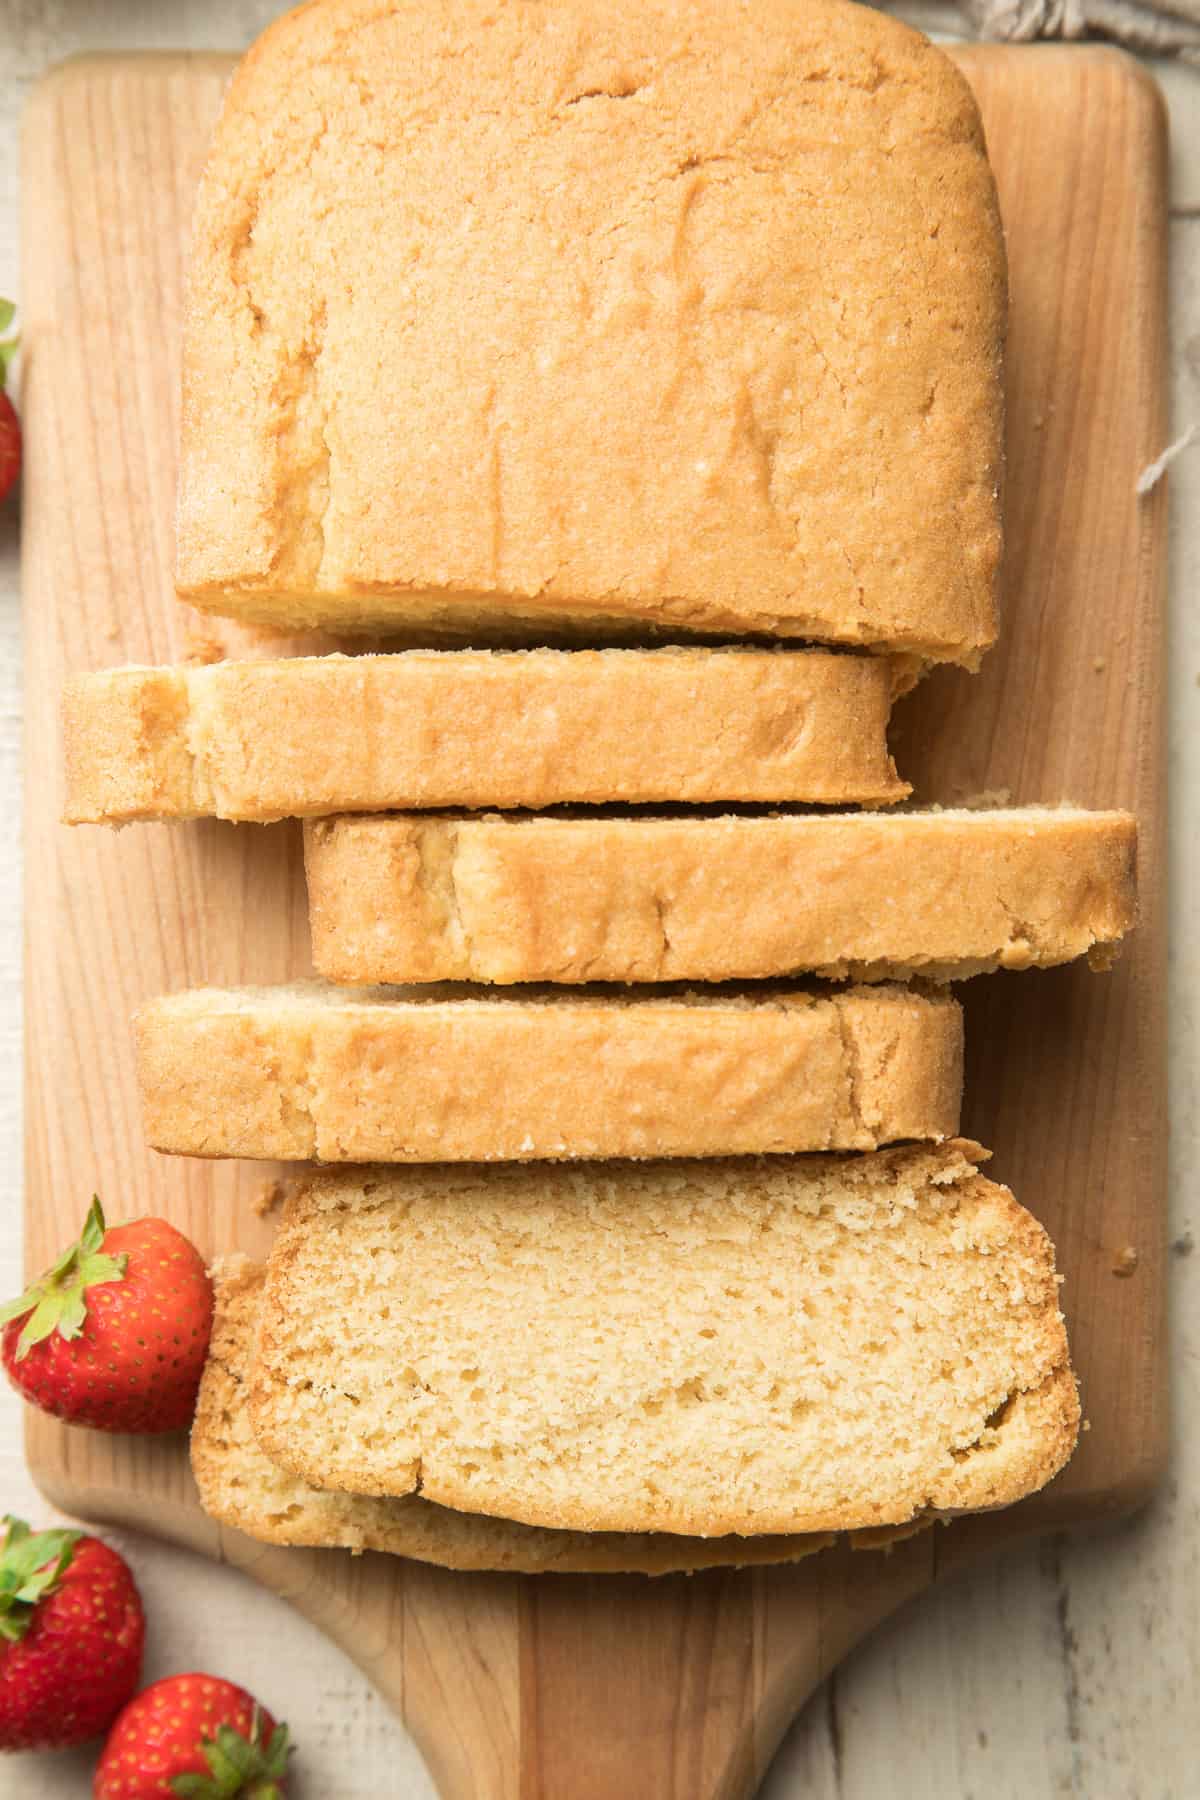 Partially sliced Vegan Pound Cake on a cutting board.